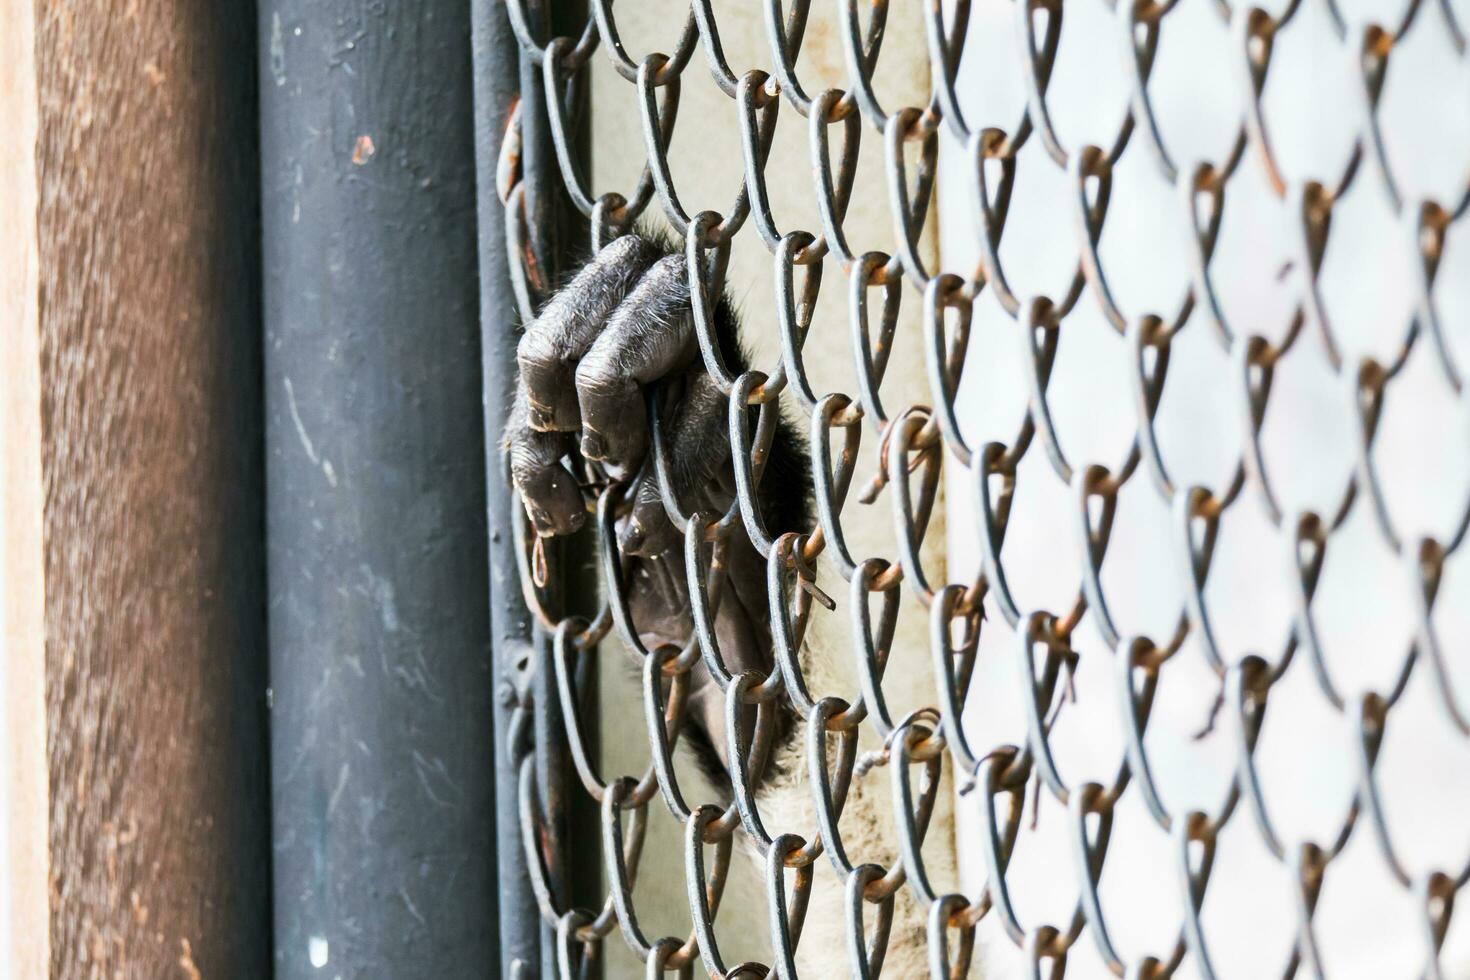 Monkey fingers are holding hand on cage photo